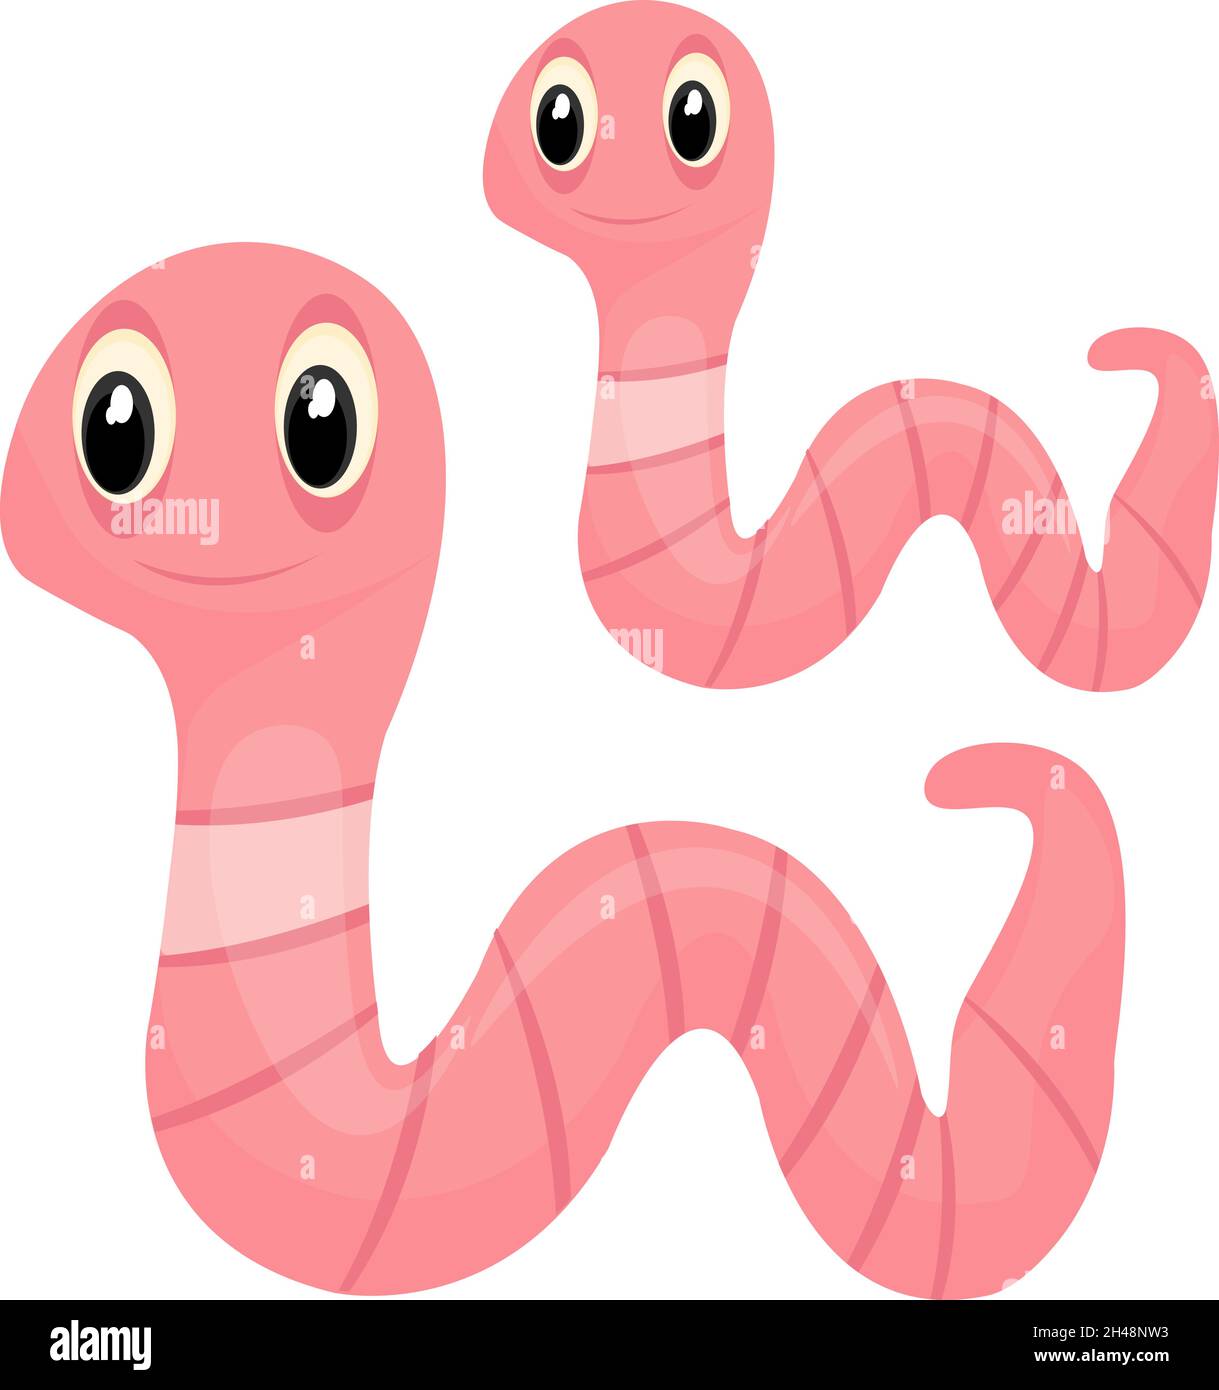 Earth worms, illustration, vector on a white background Stock